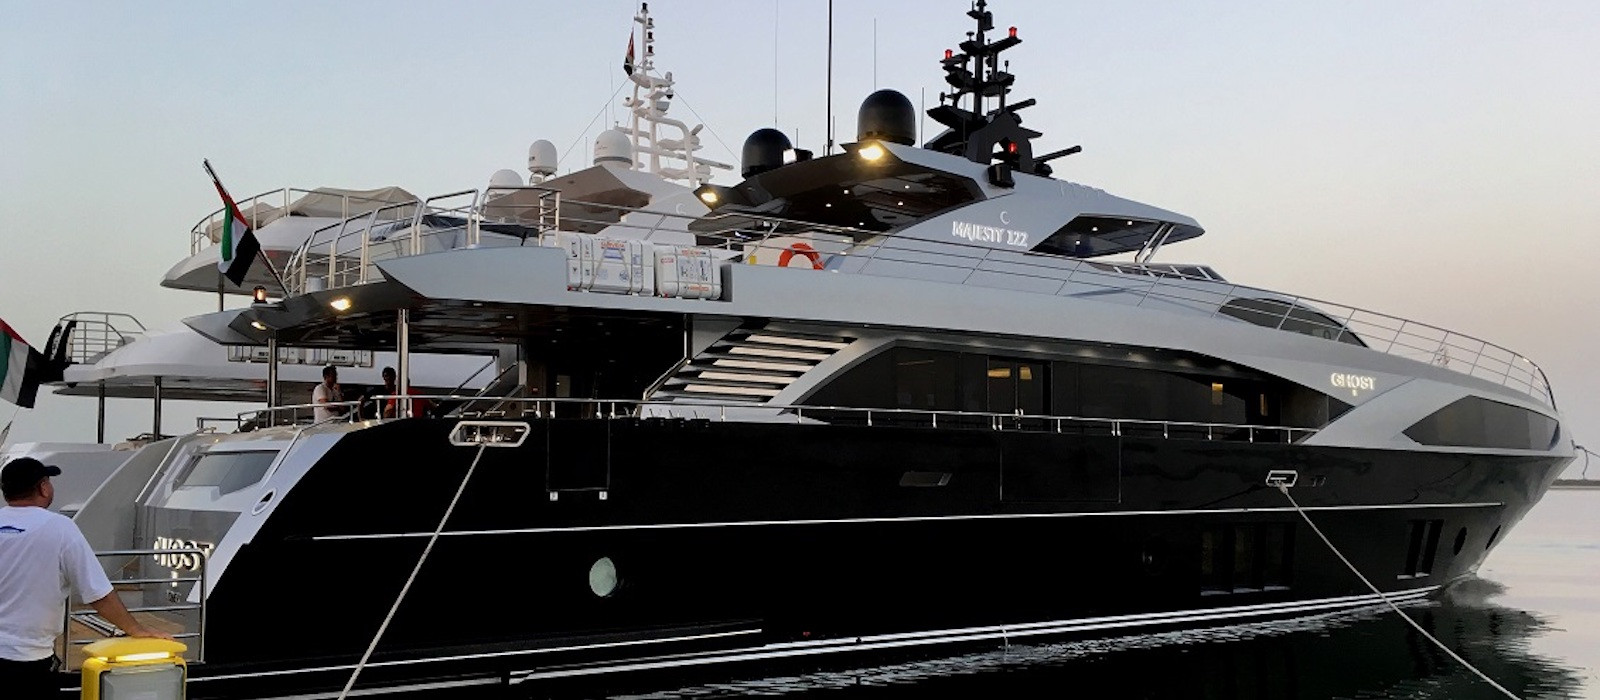 Ghost II superyacht hire at the dock